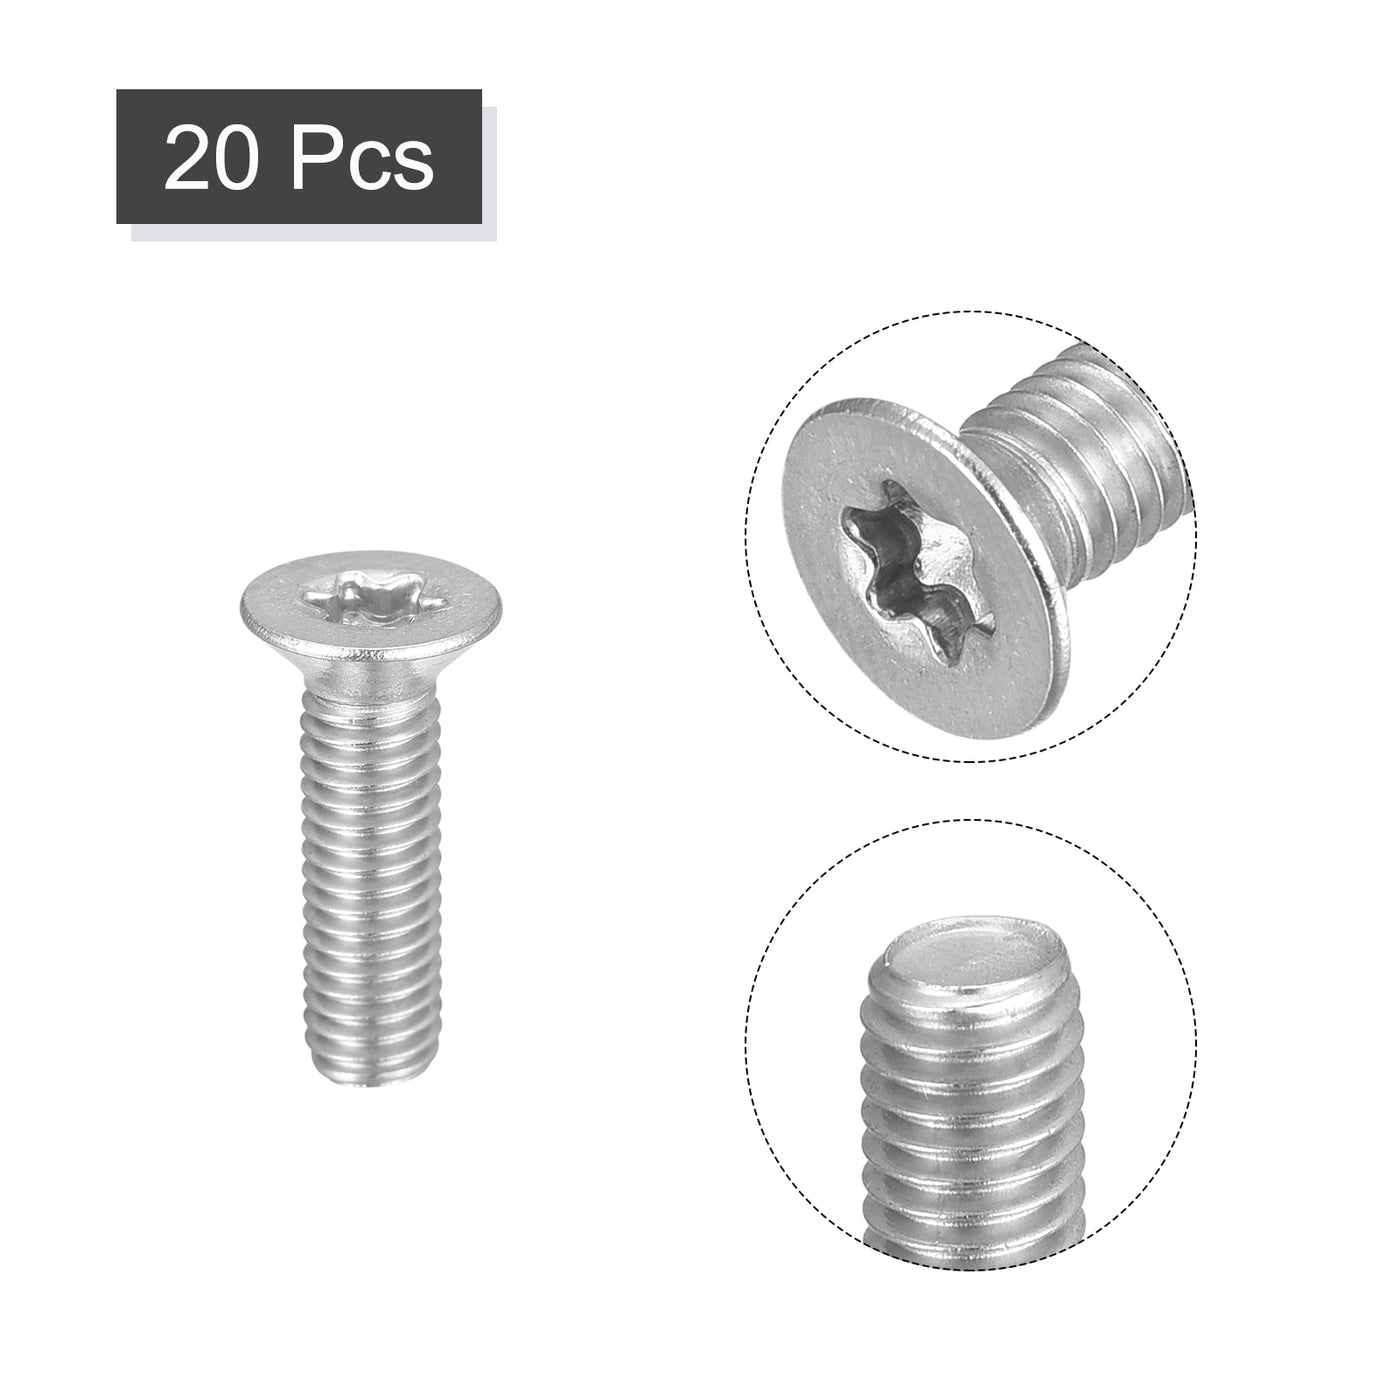 uxcell Uxcell M5x18mm Torx Security Screws, 20pcs 316 Stainless Steel Countersunk Head Screw